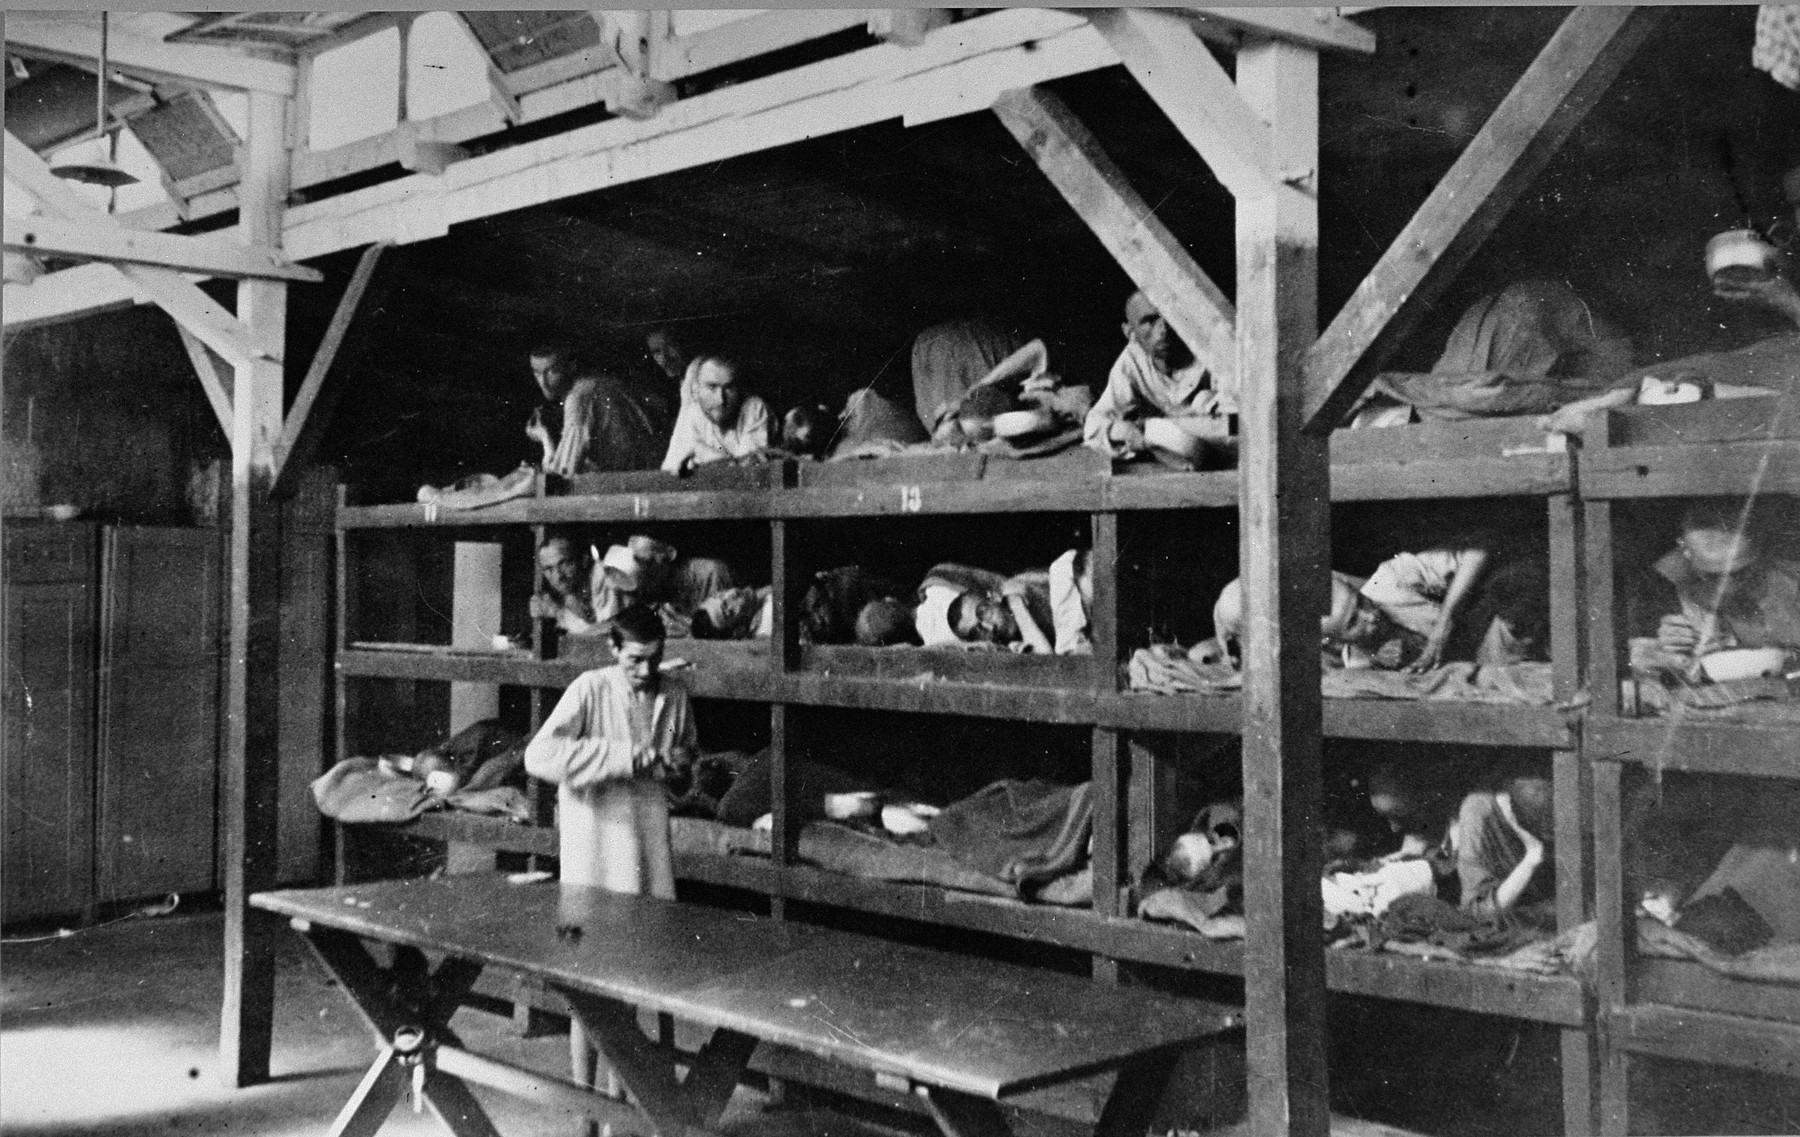 Survivors lie in multi-tiered bunks in a barracks in the newly liberated Buchenwald concentration camp.

The original caption reads "Here is a Nazi hospital ward in Buchenwald concentration camp.  The sick prisoners who were still able to move about cared for those in the cribs."